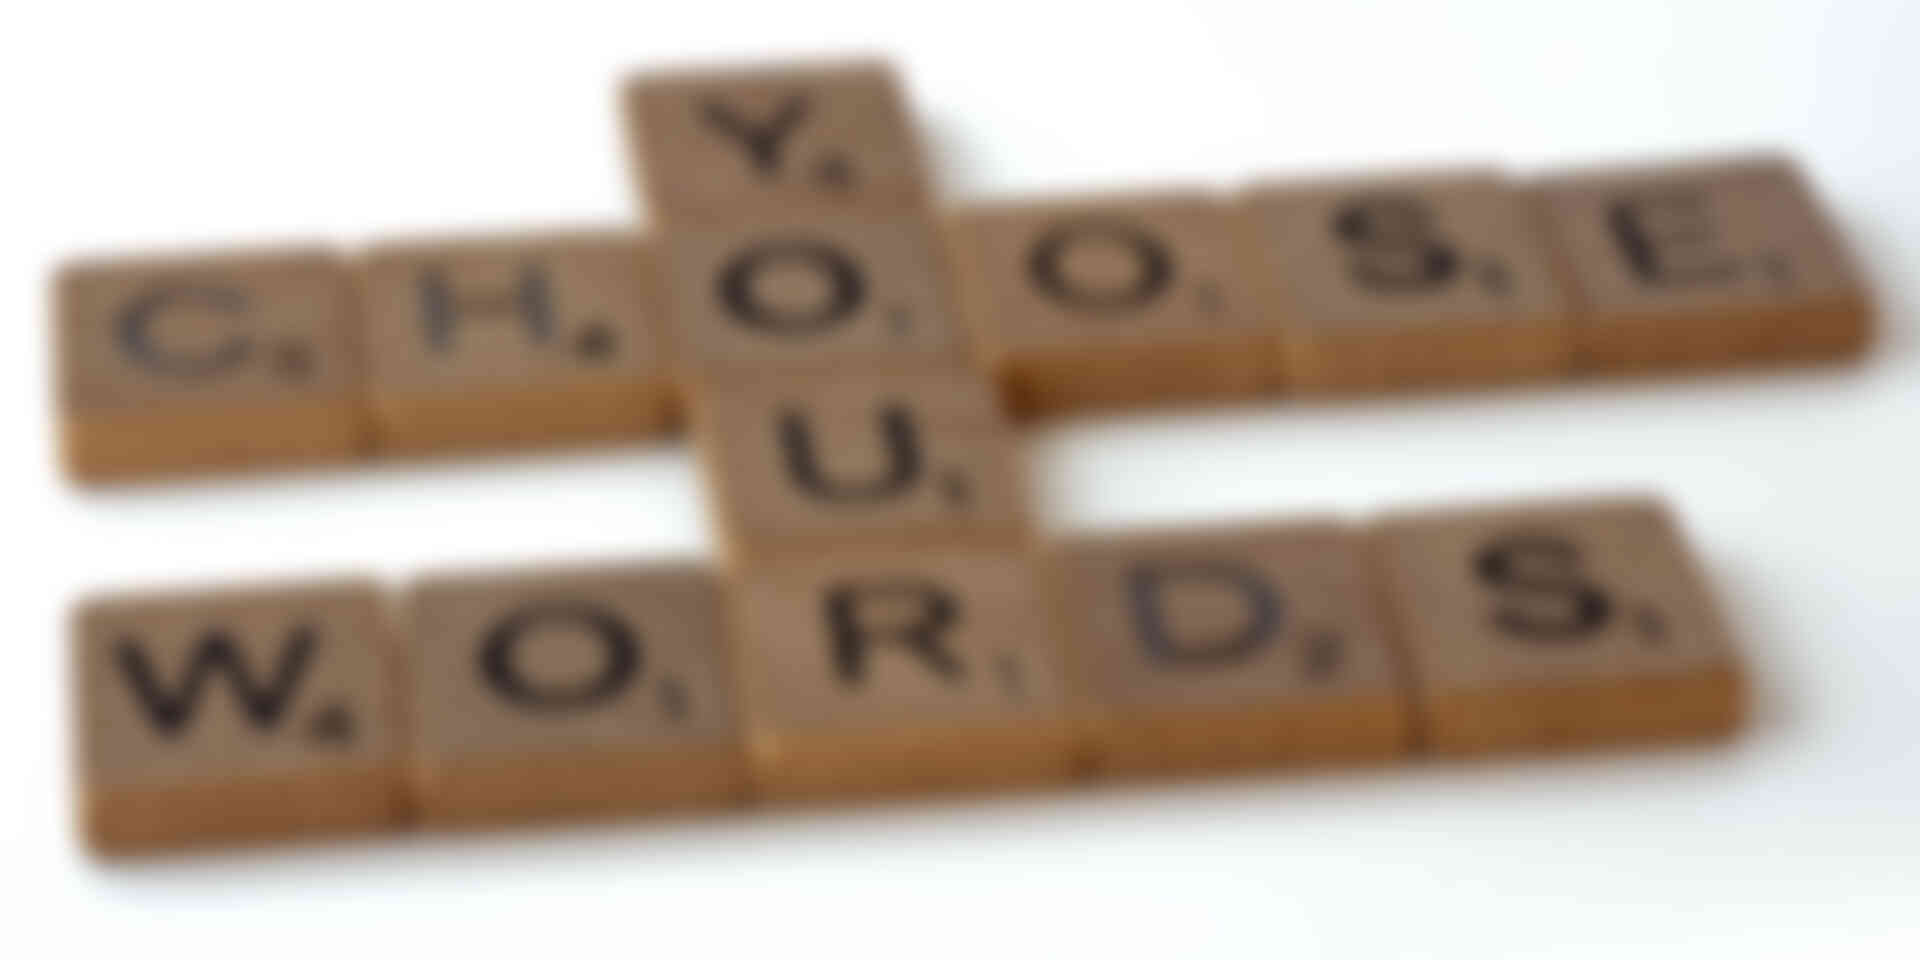 New role, new you? 5 tips to change your image - choose-your-words-game-pieces